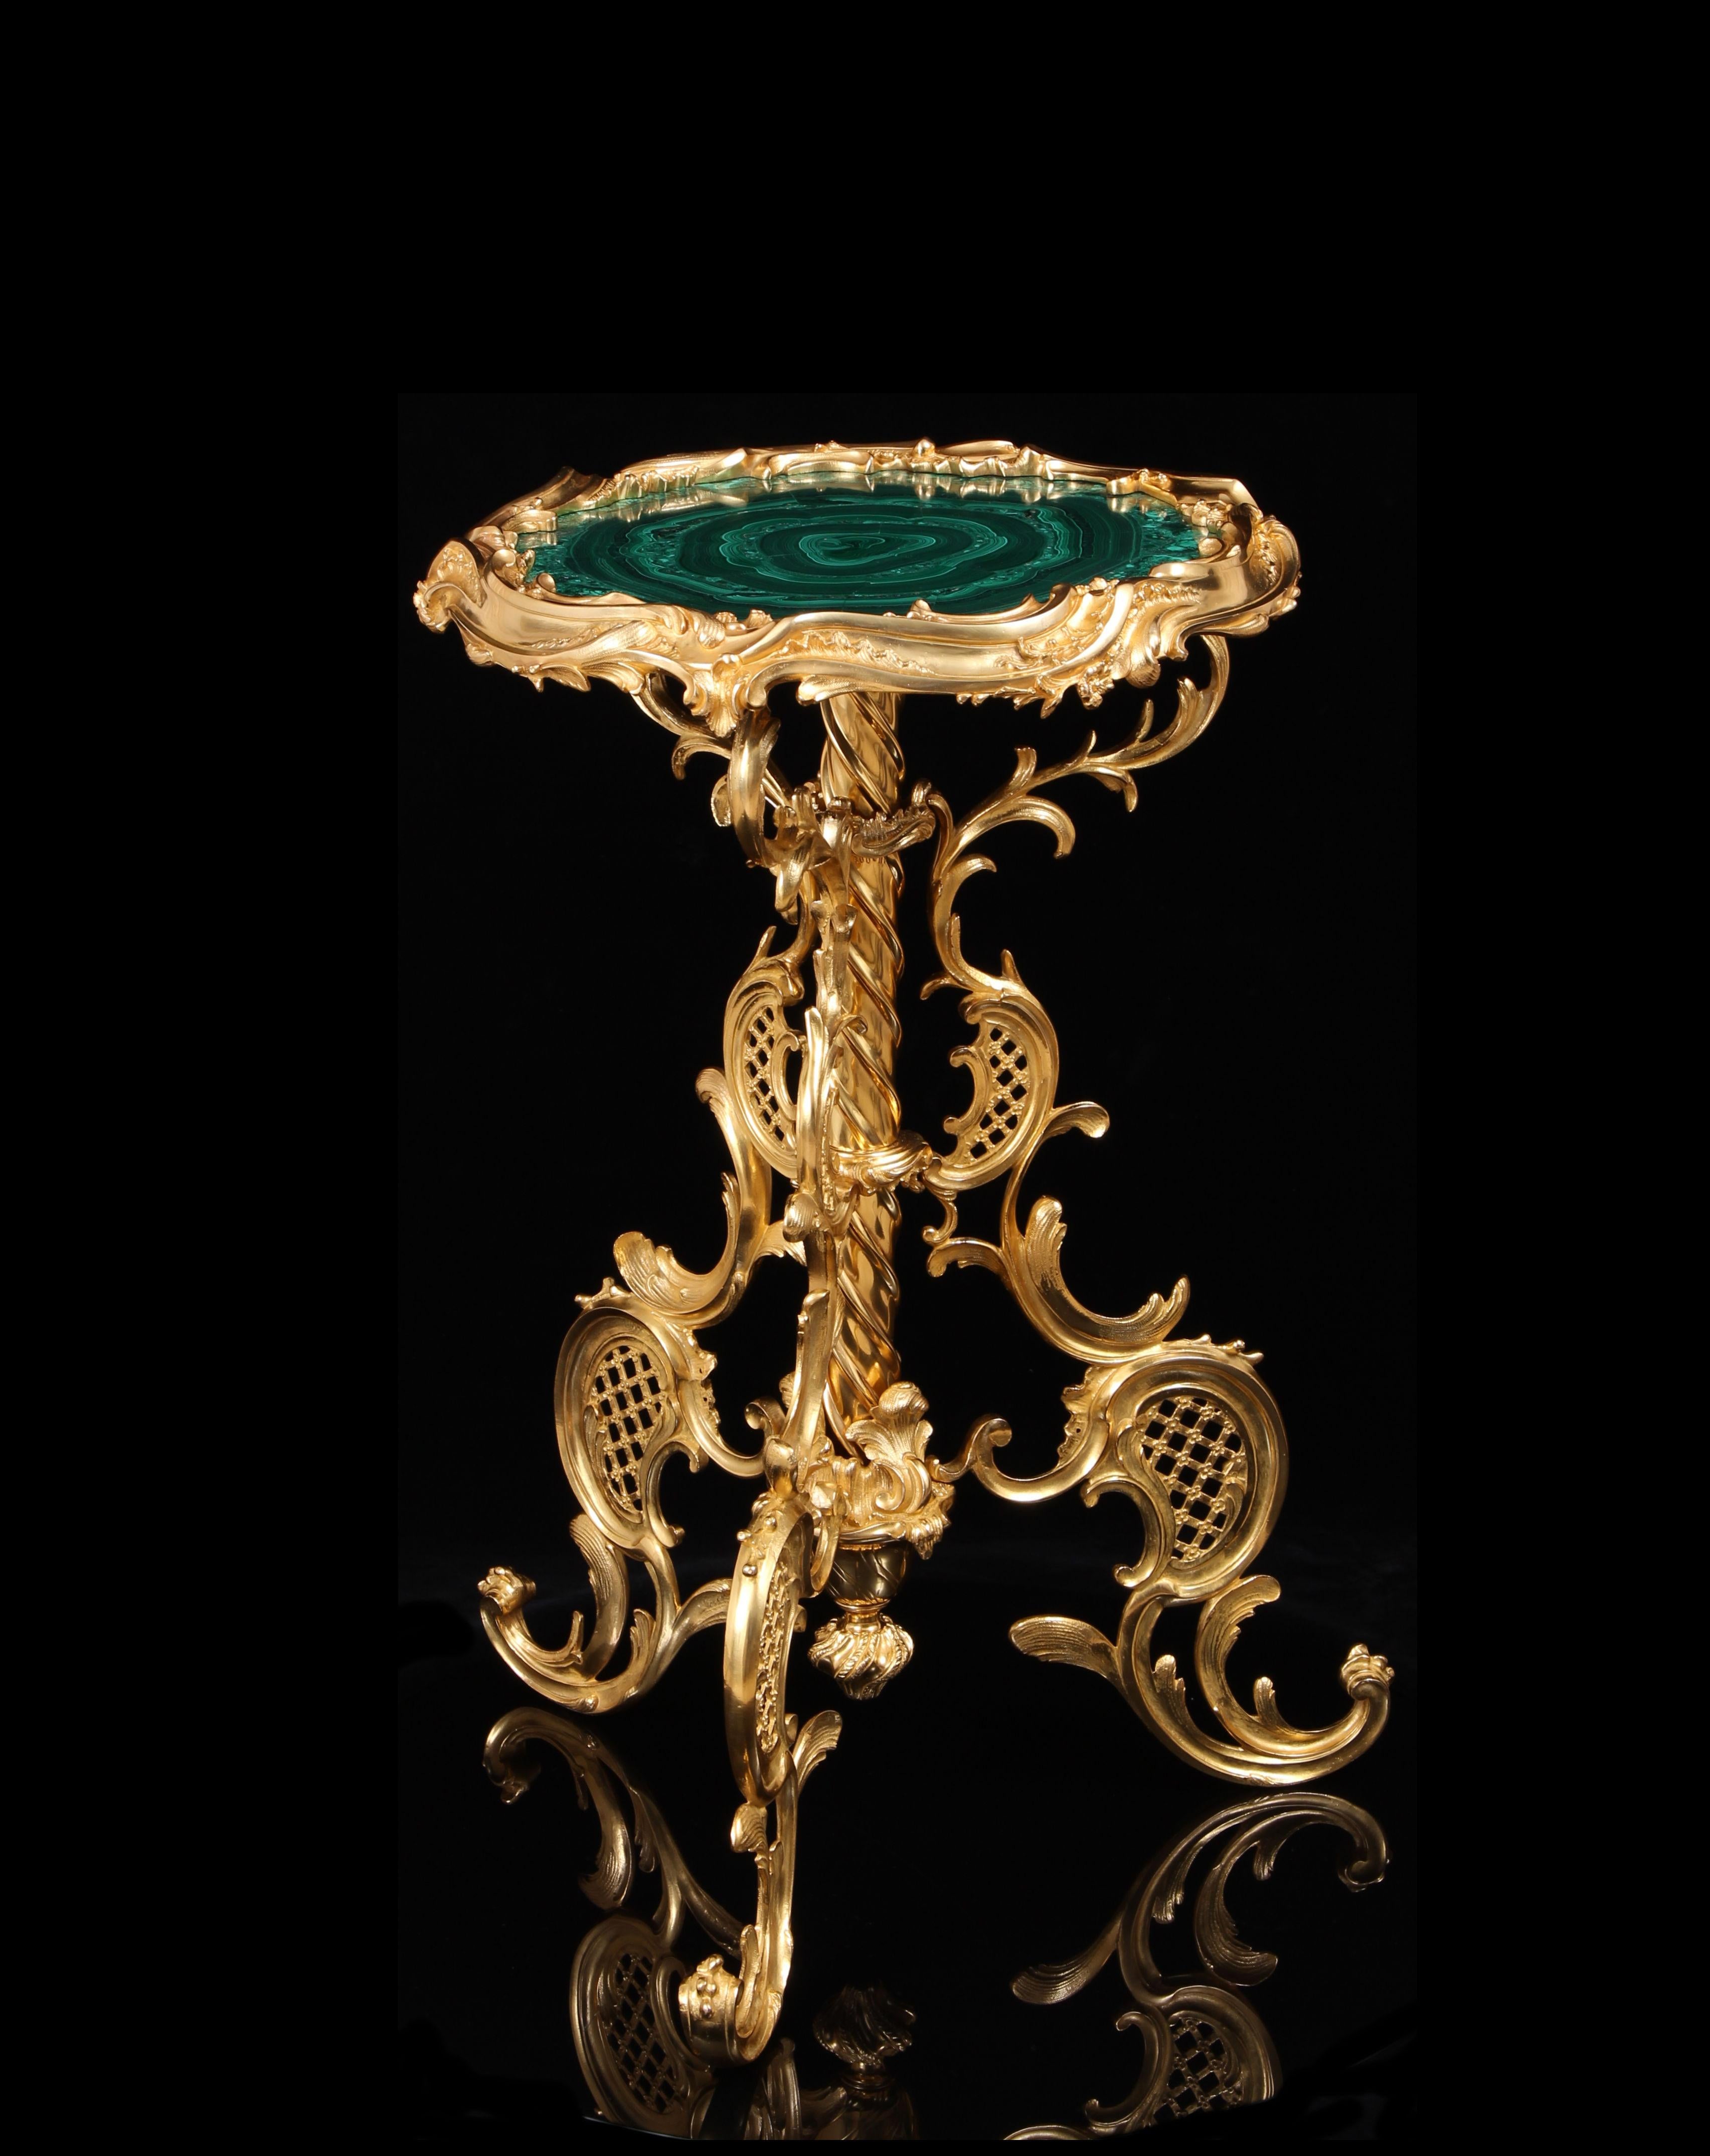 19th Century Gilt Bronze & Malachite Guéridon Table In Good Condition For Sale In London, by appointment only